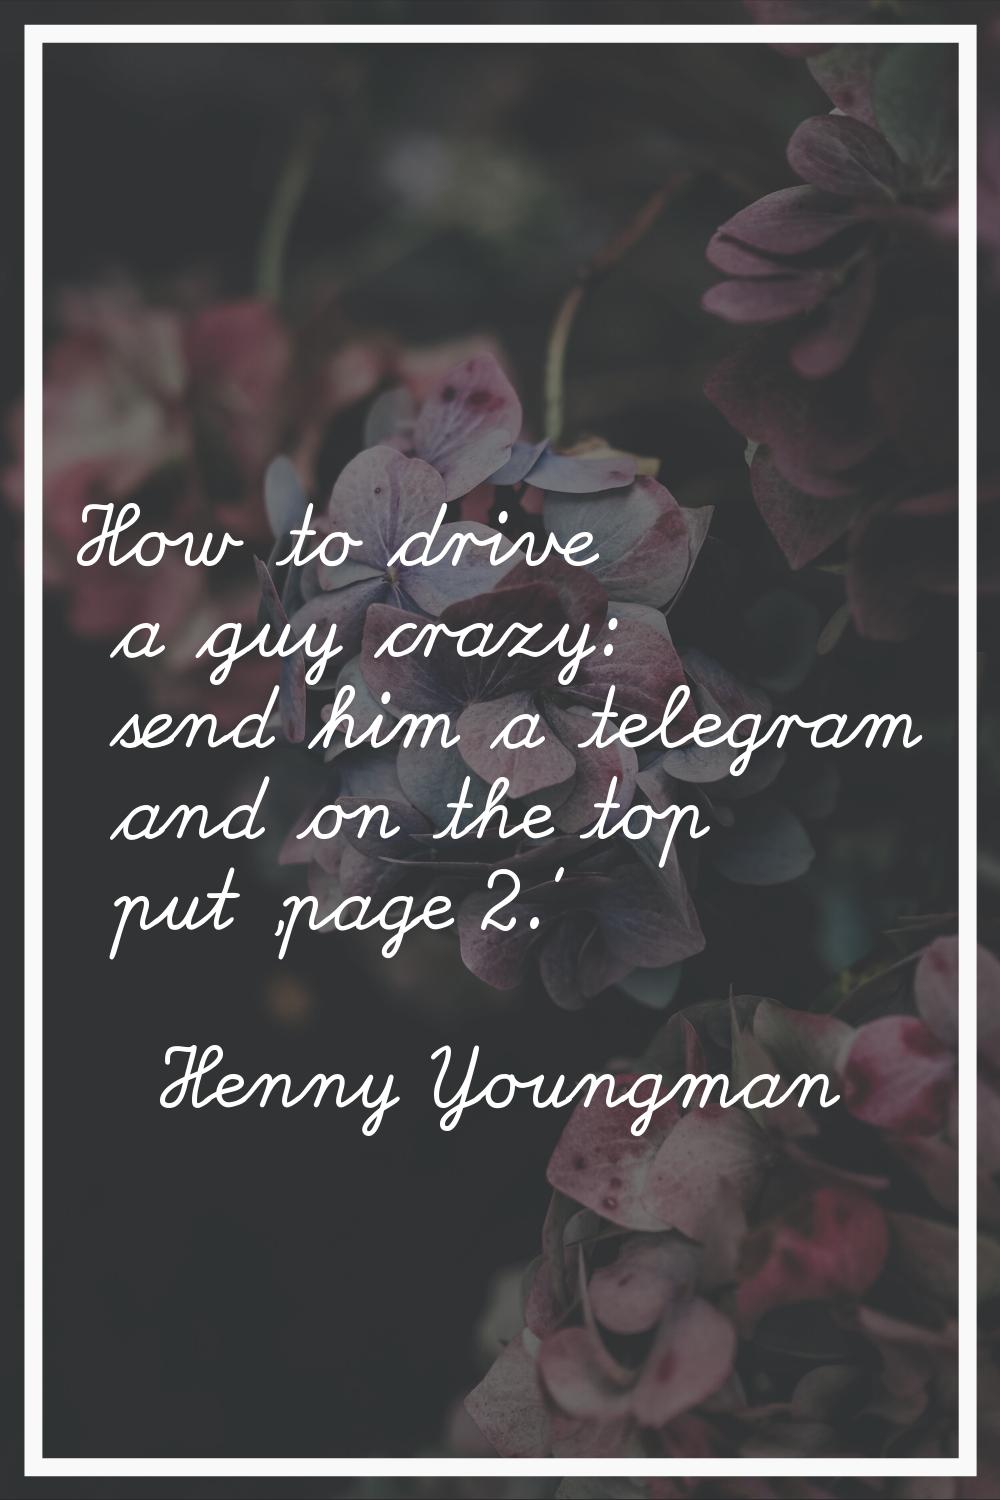 How to drive a guy crazy: send him a telegram and on the top put 'page 2.'